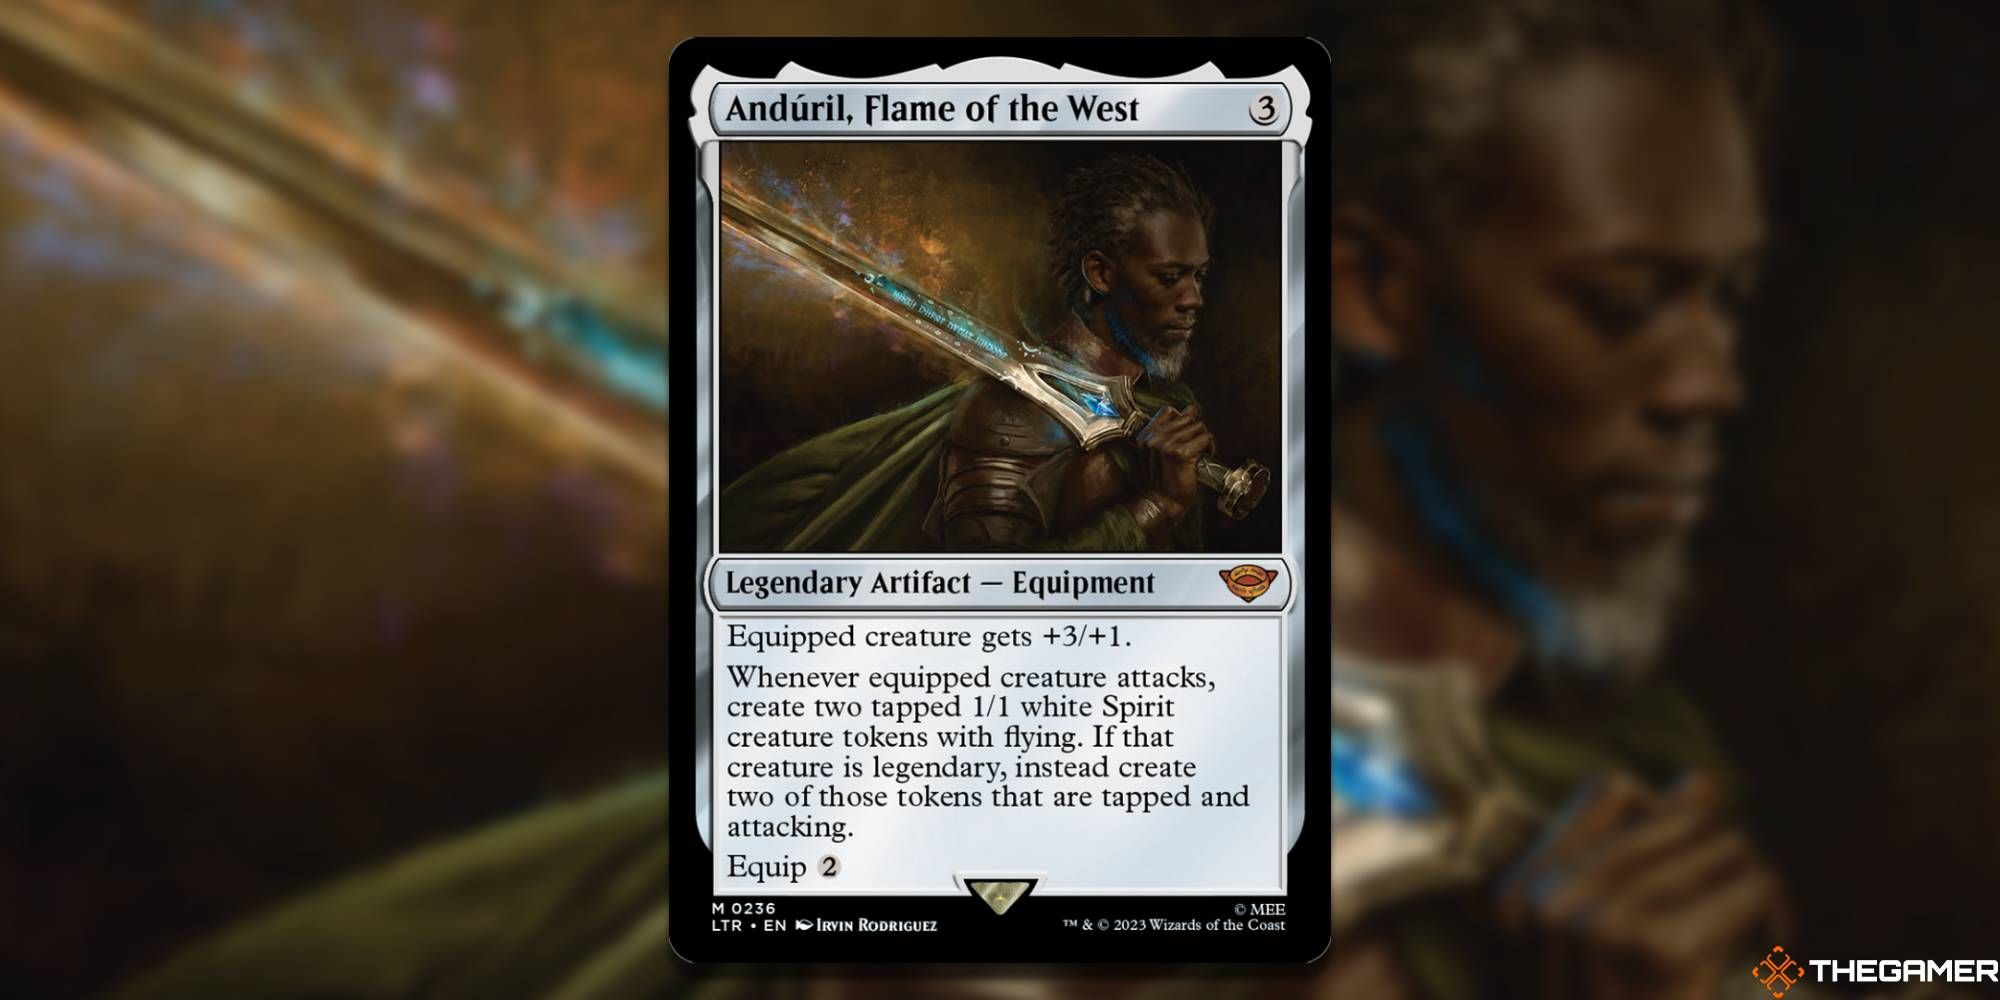 Image of the Anduril, Flame of the West card in Magic: The Gathering, with art by Irvin Rodriguez